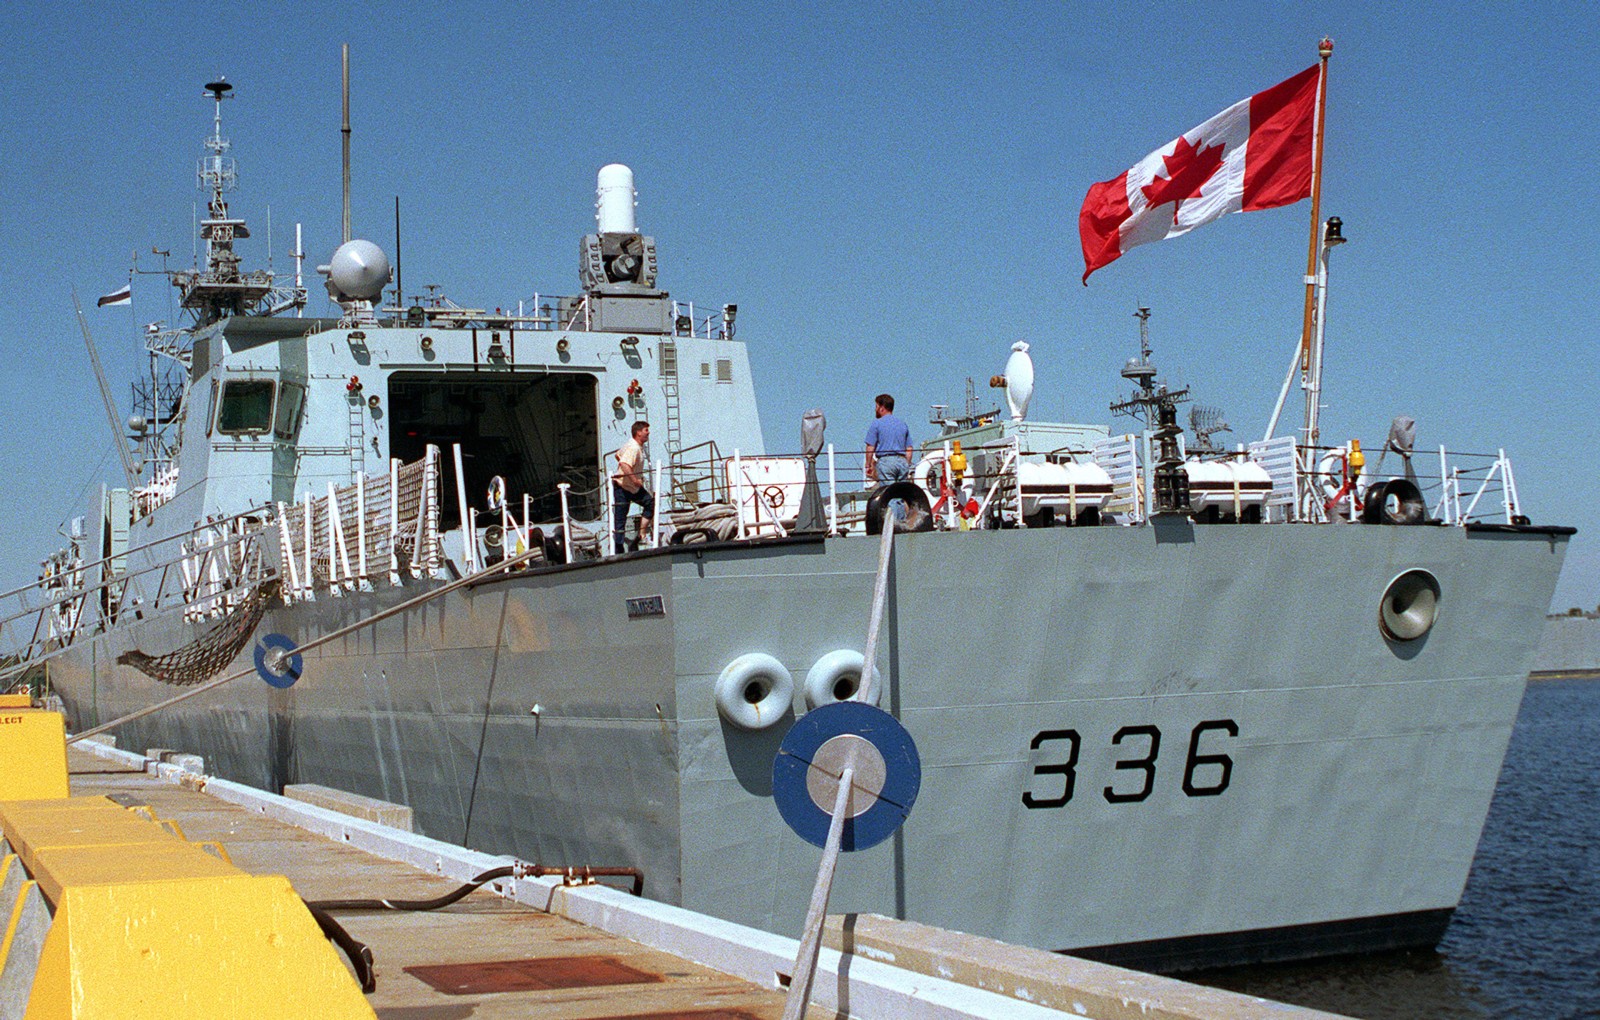 ffh-336 hmcs montreal halifax class helicopter patrol frigate ncsm royal canadian navy 47